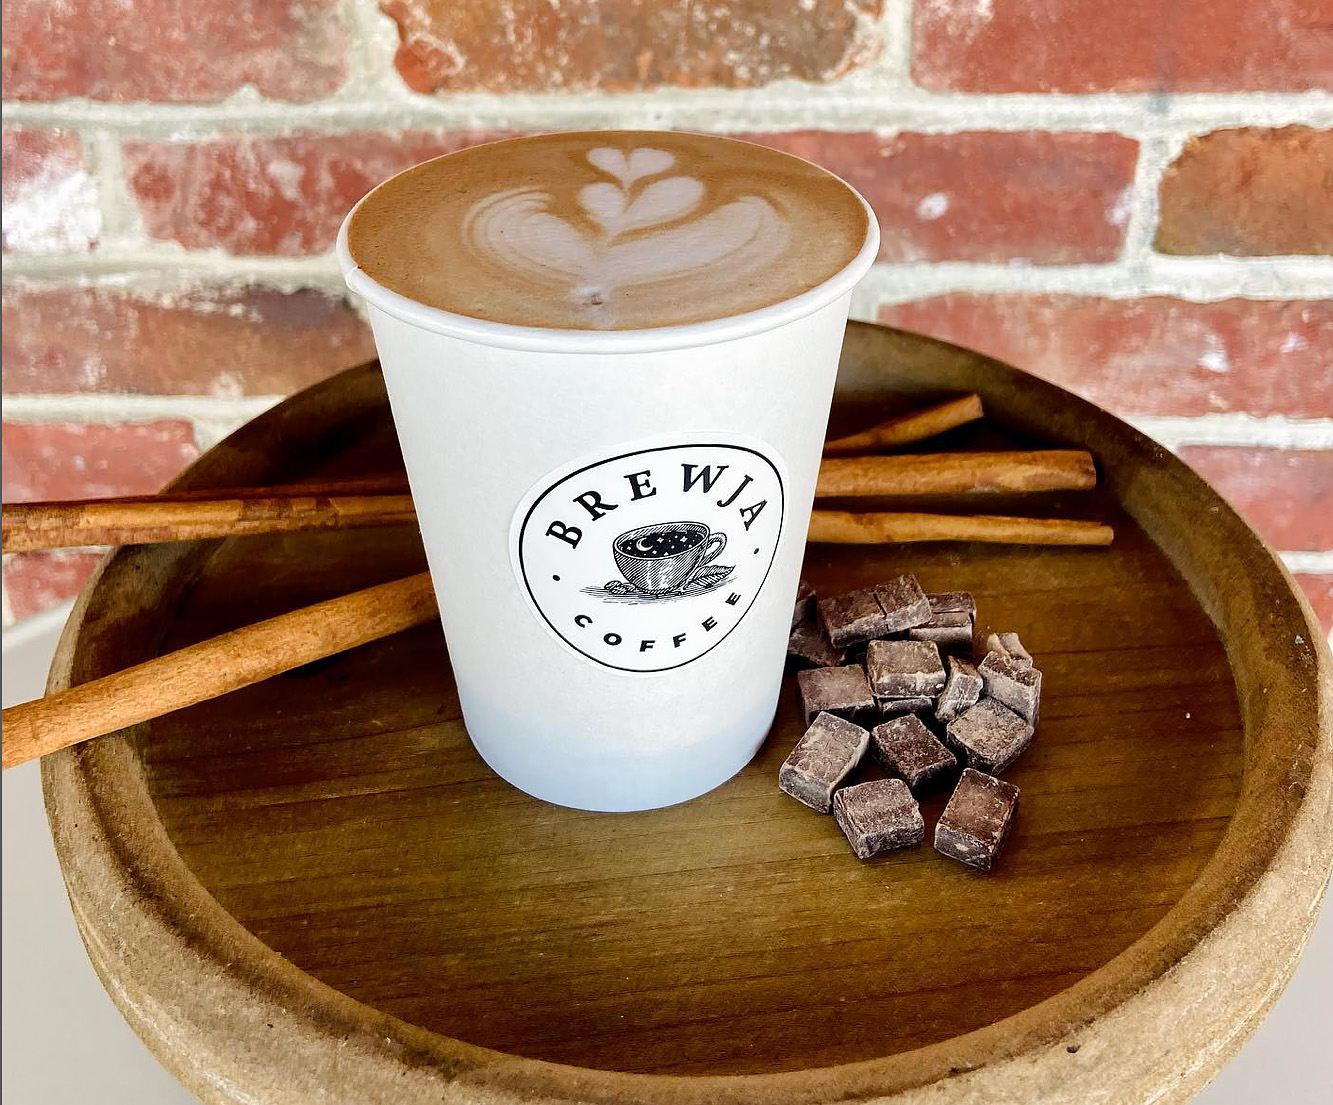 A latte from Brewja Coffee sits on a wooden table with some cinnamon sticks and chunks of chocolate.